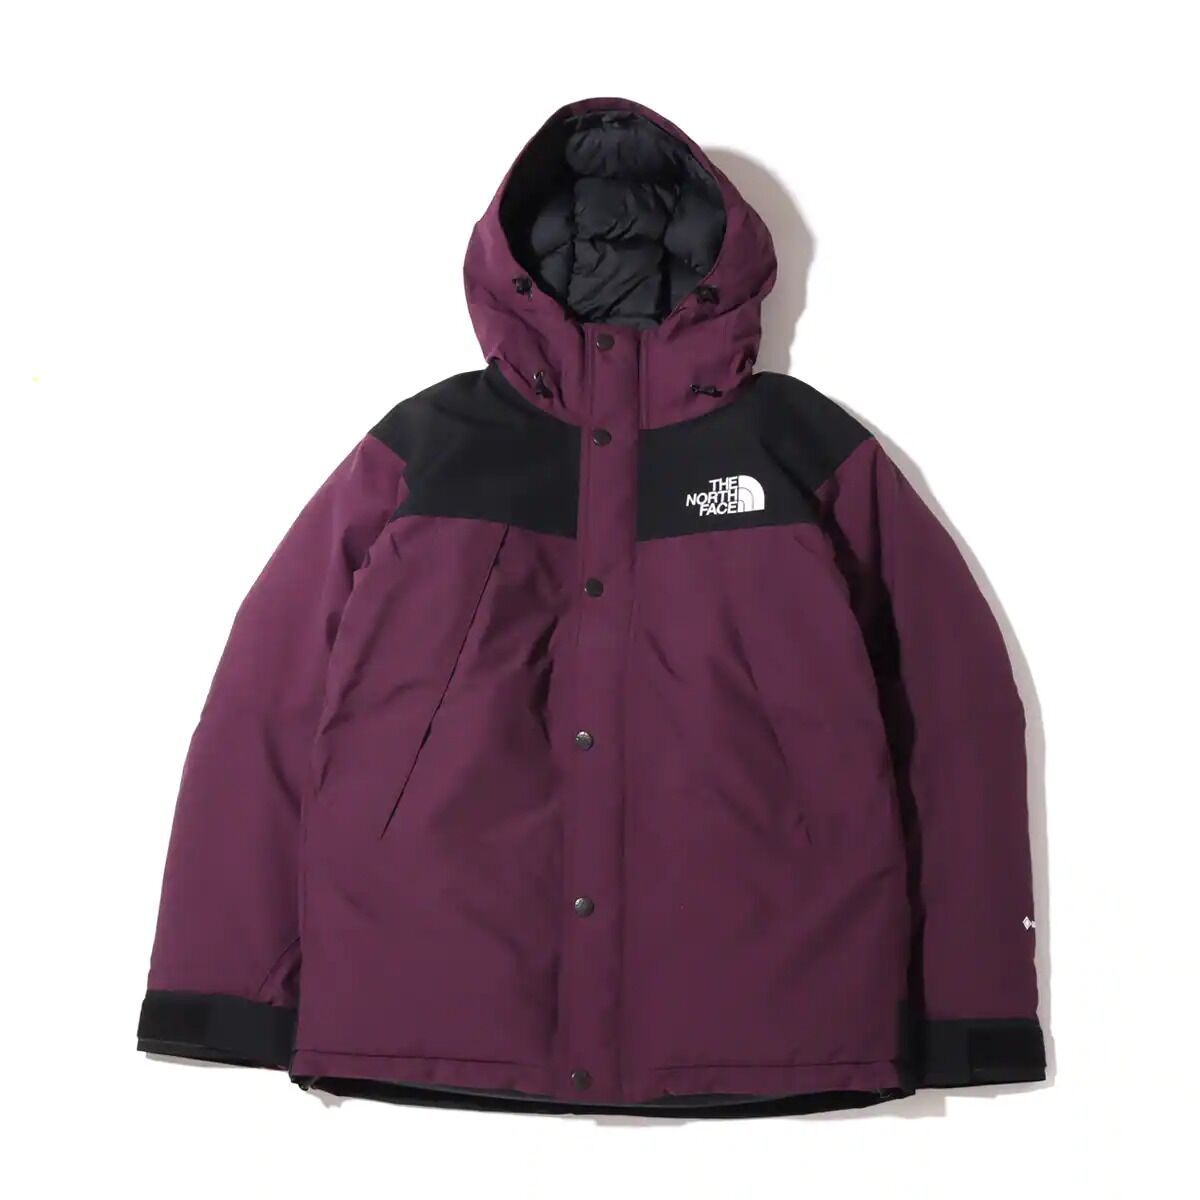 The North Face】Baltro Light Jacket (バルトロライトジャ...